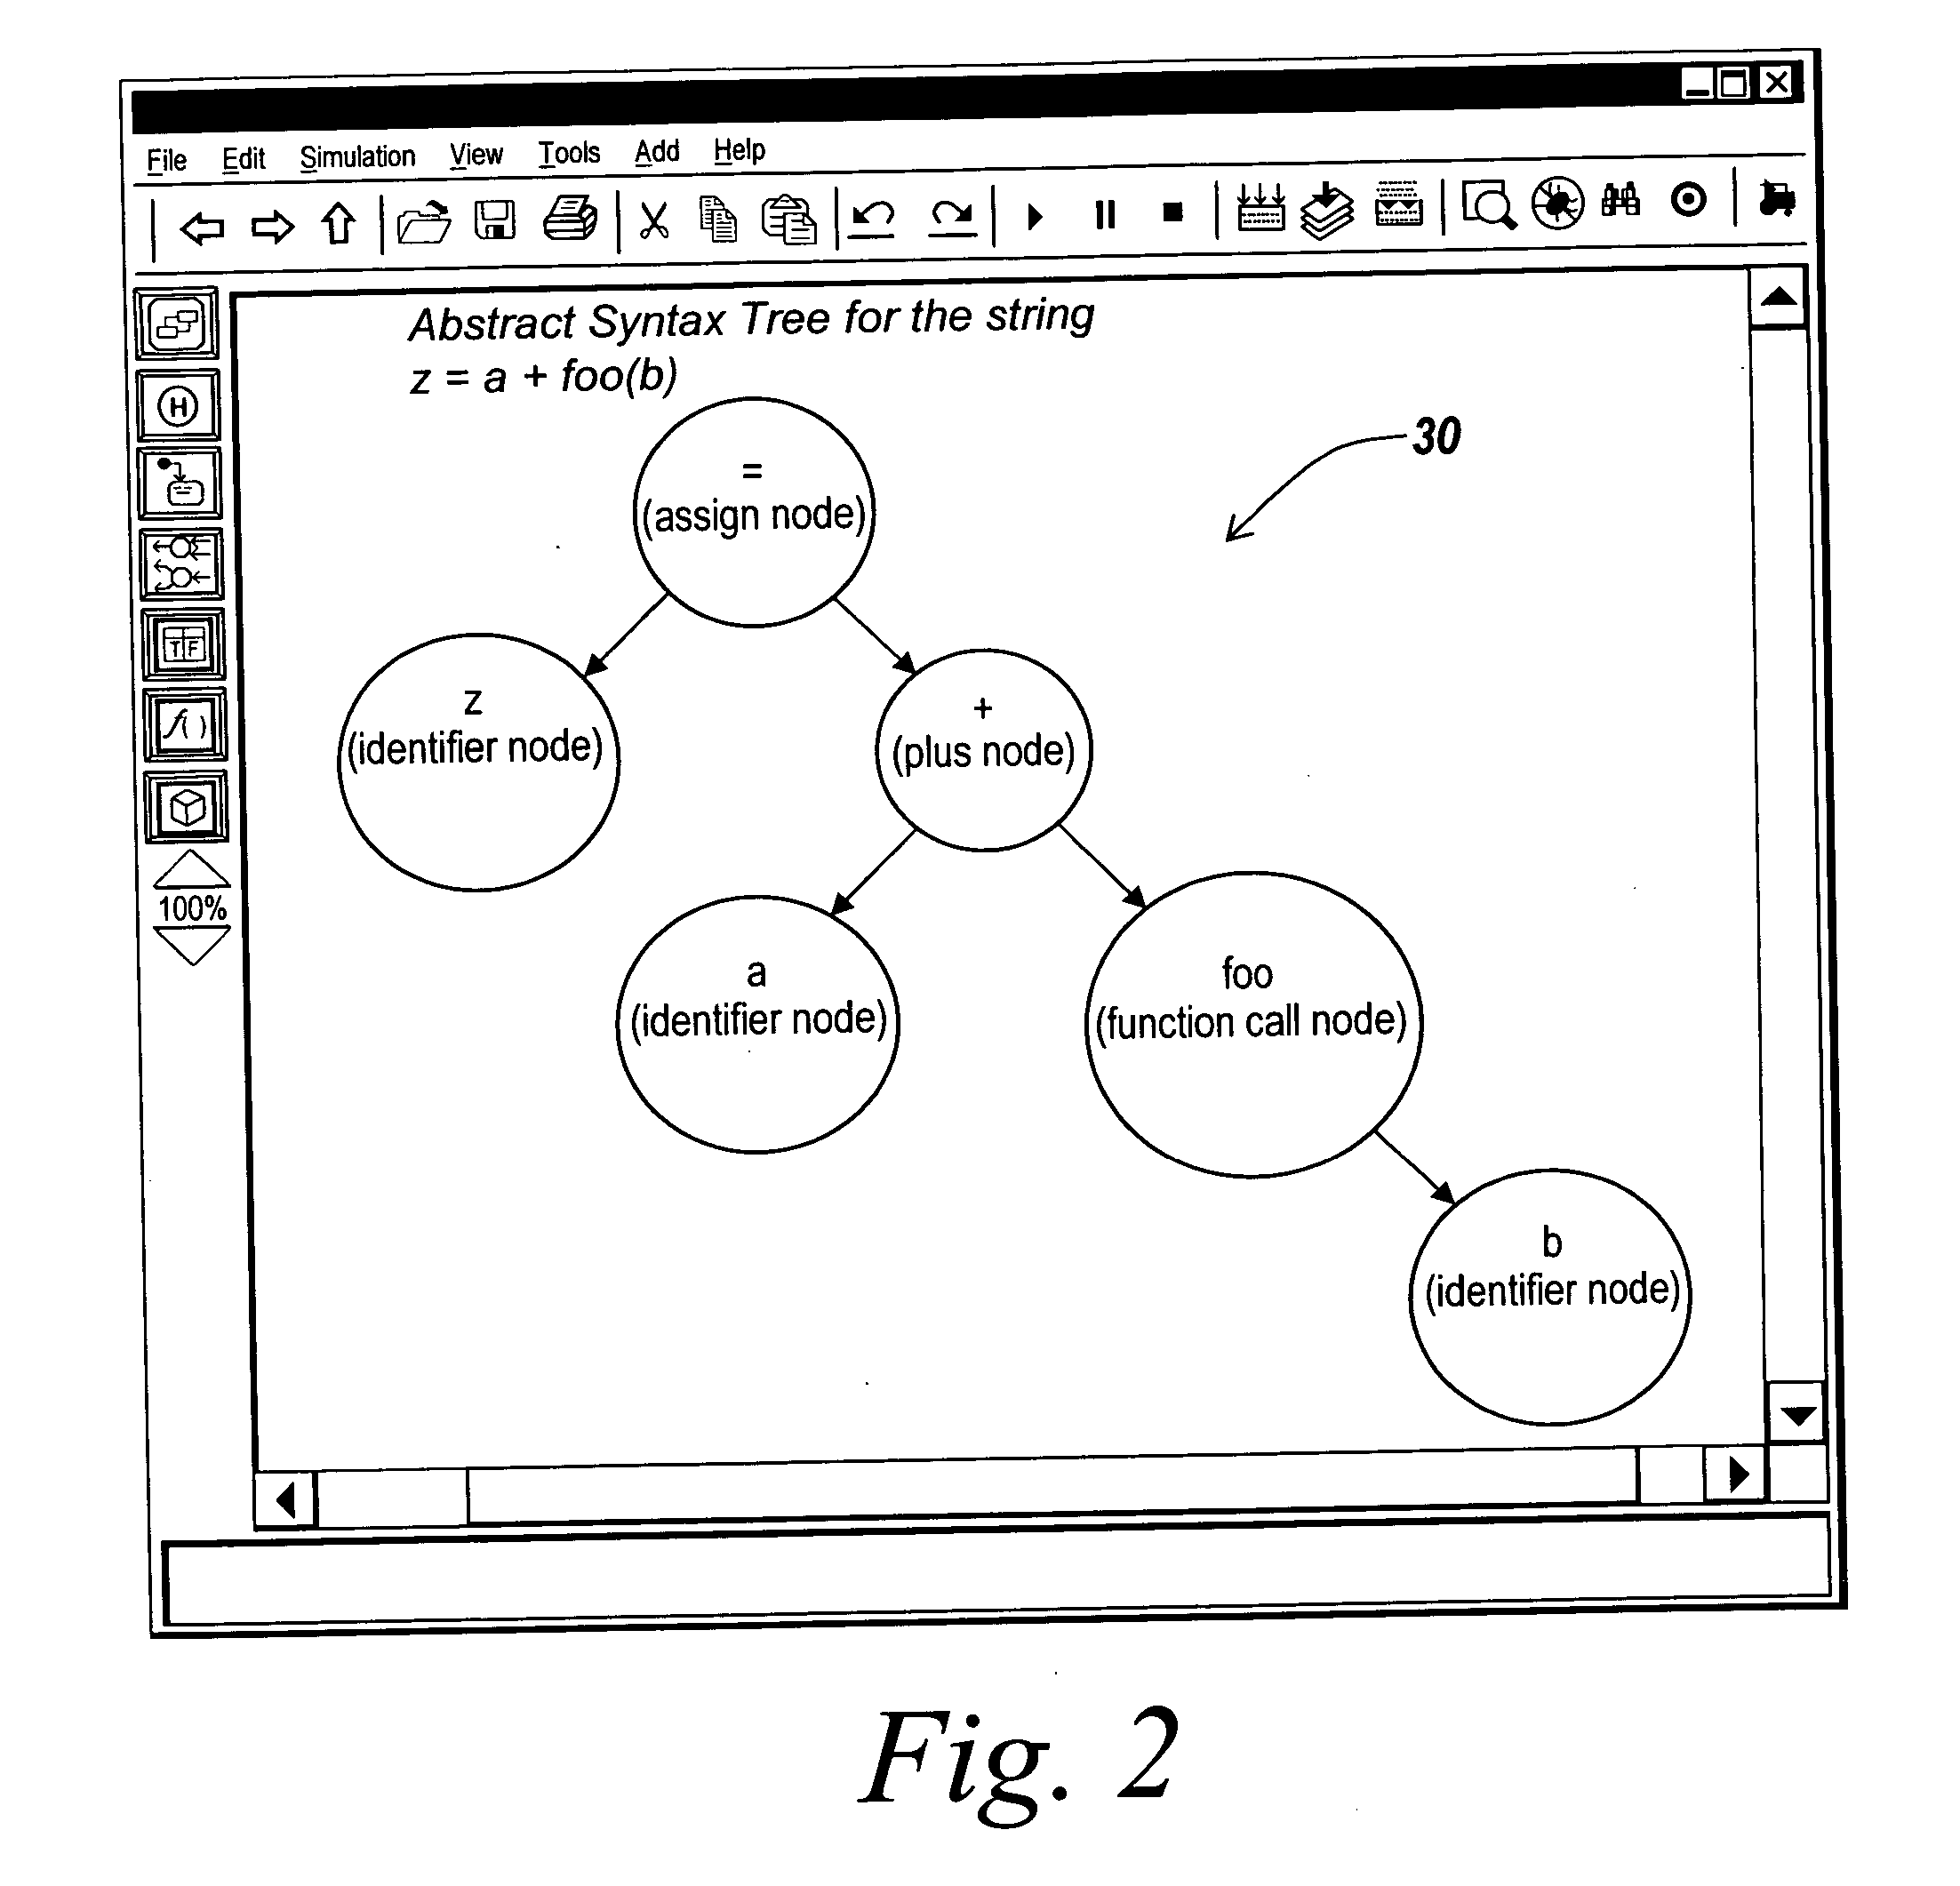 System and method for providing indicators of textual items having intrinsic executable computational meaning within a graphical language environment